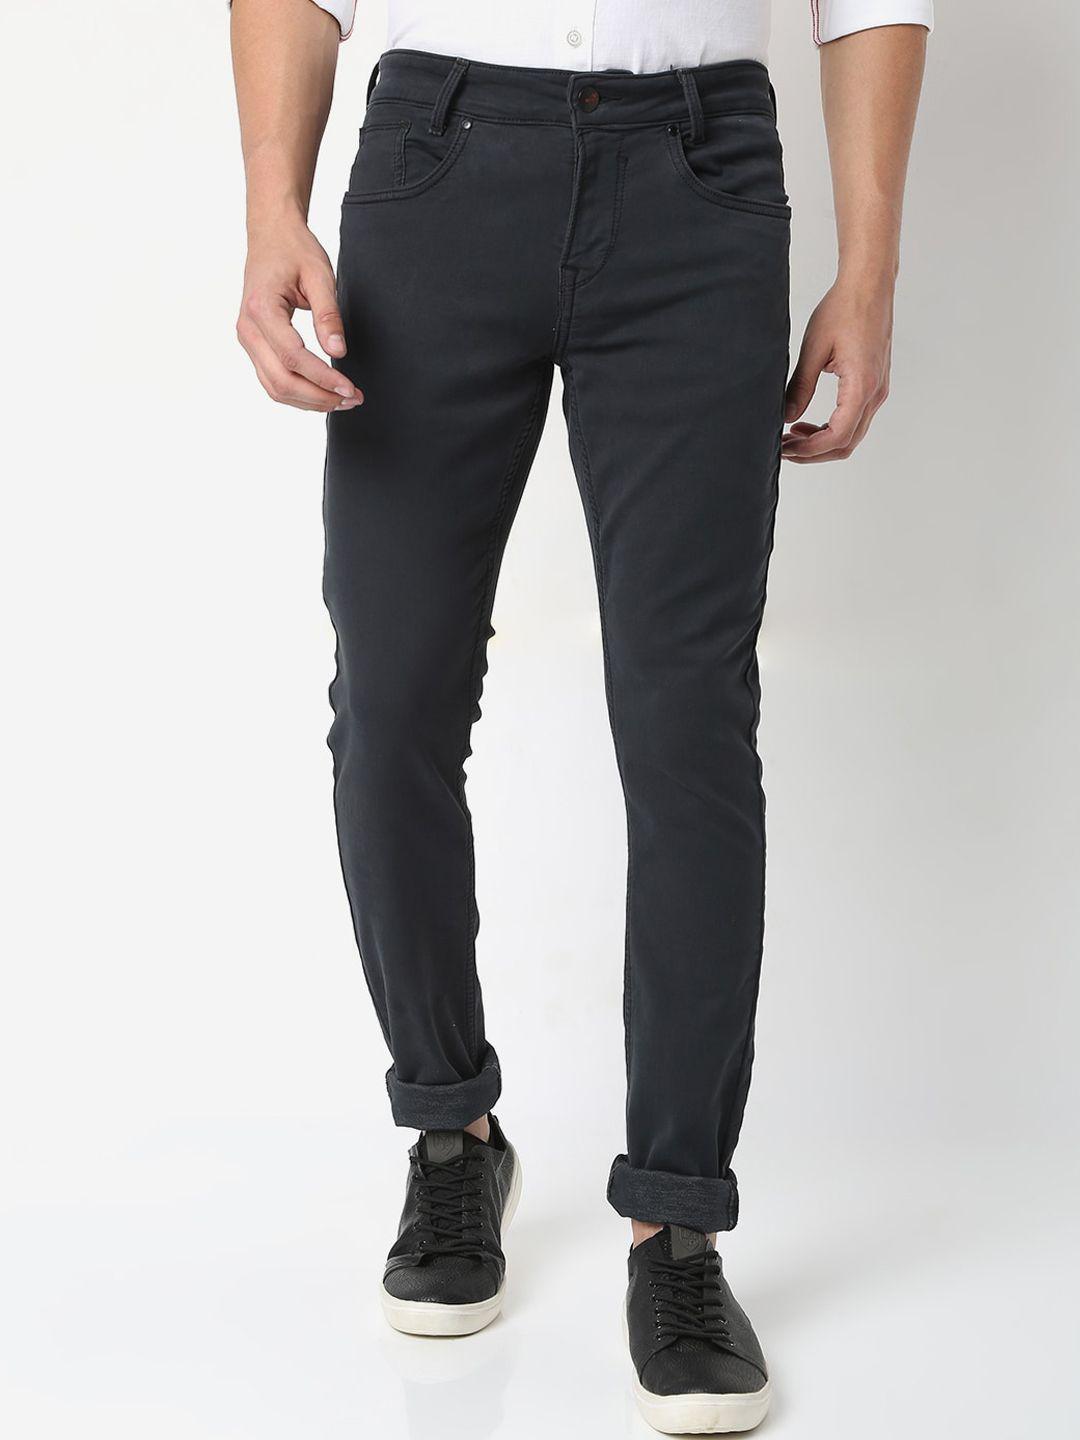 mufti men charcoal skinny fit chinos trousers